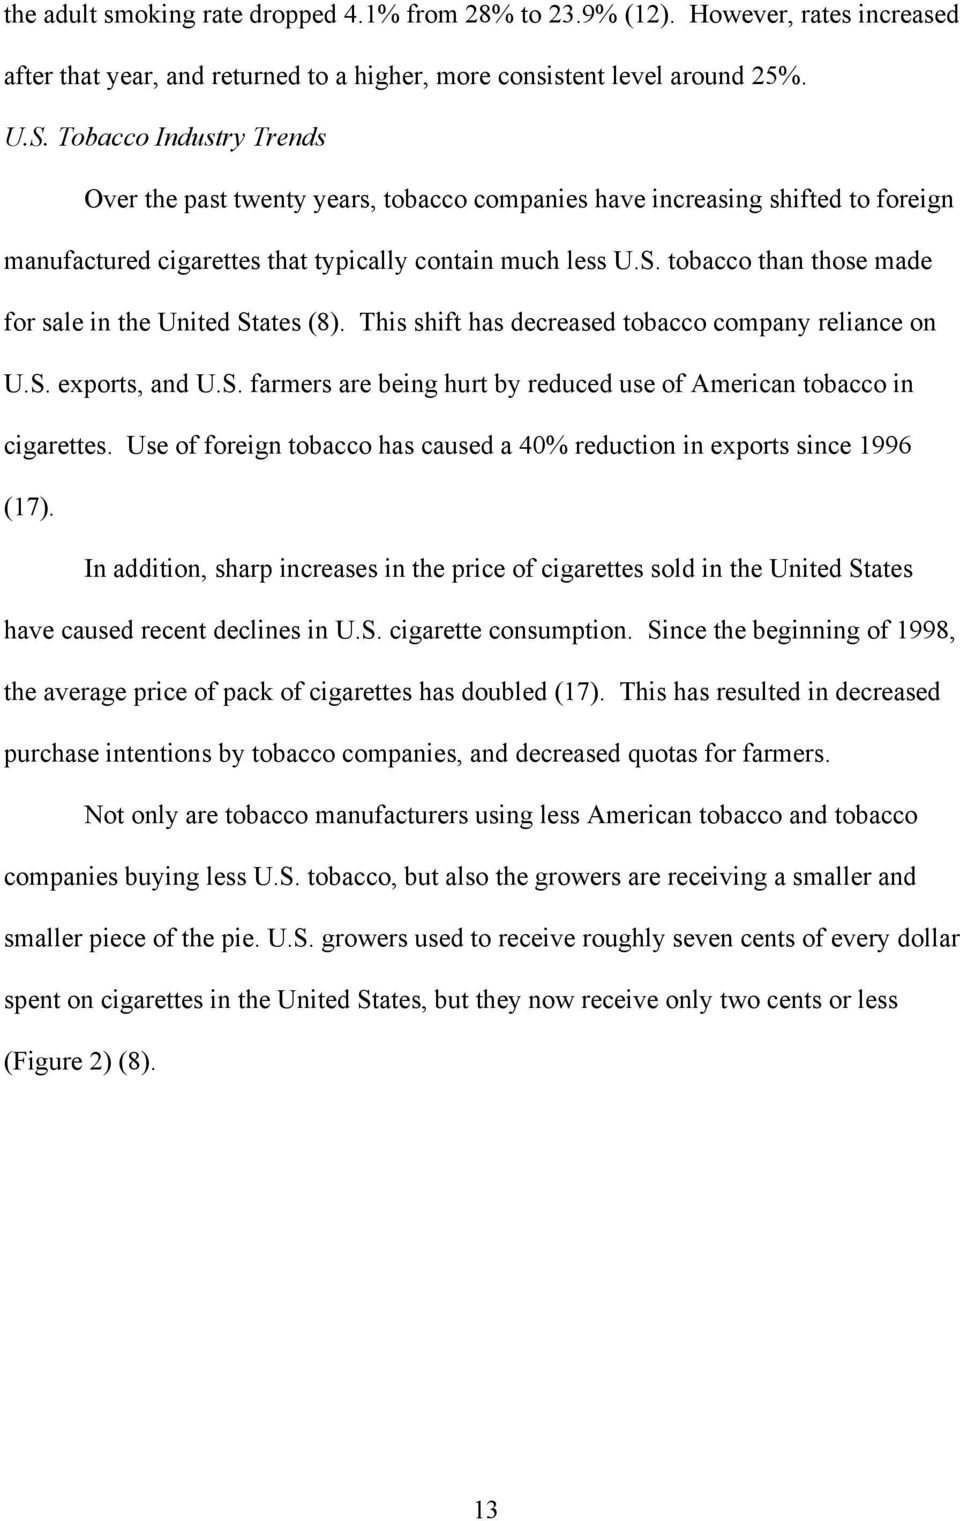 tobacco than those made for sale in the United States (8). This shift has decreased tobacco company reliance on U.S. exports, and U.S. farmers are being hurt by reduced use of American tobacco in cigarettes.